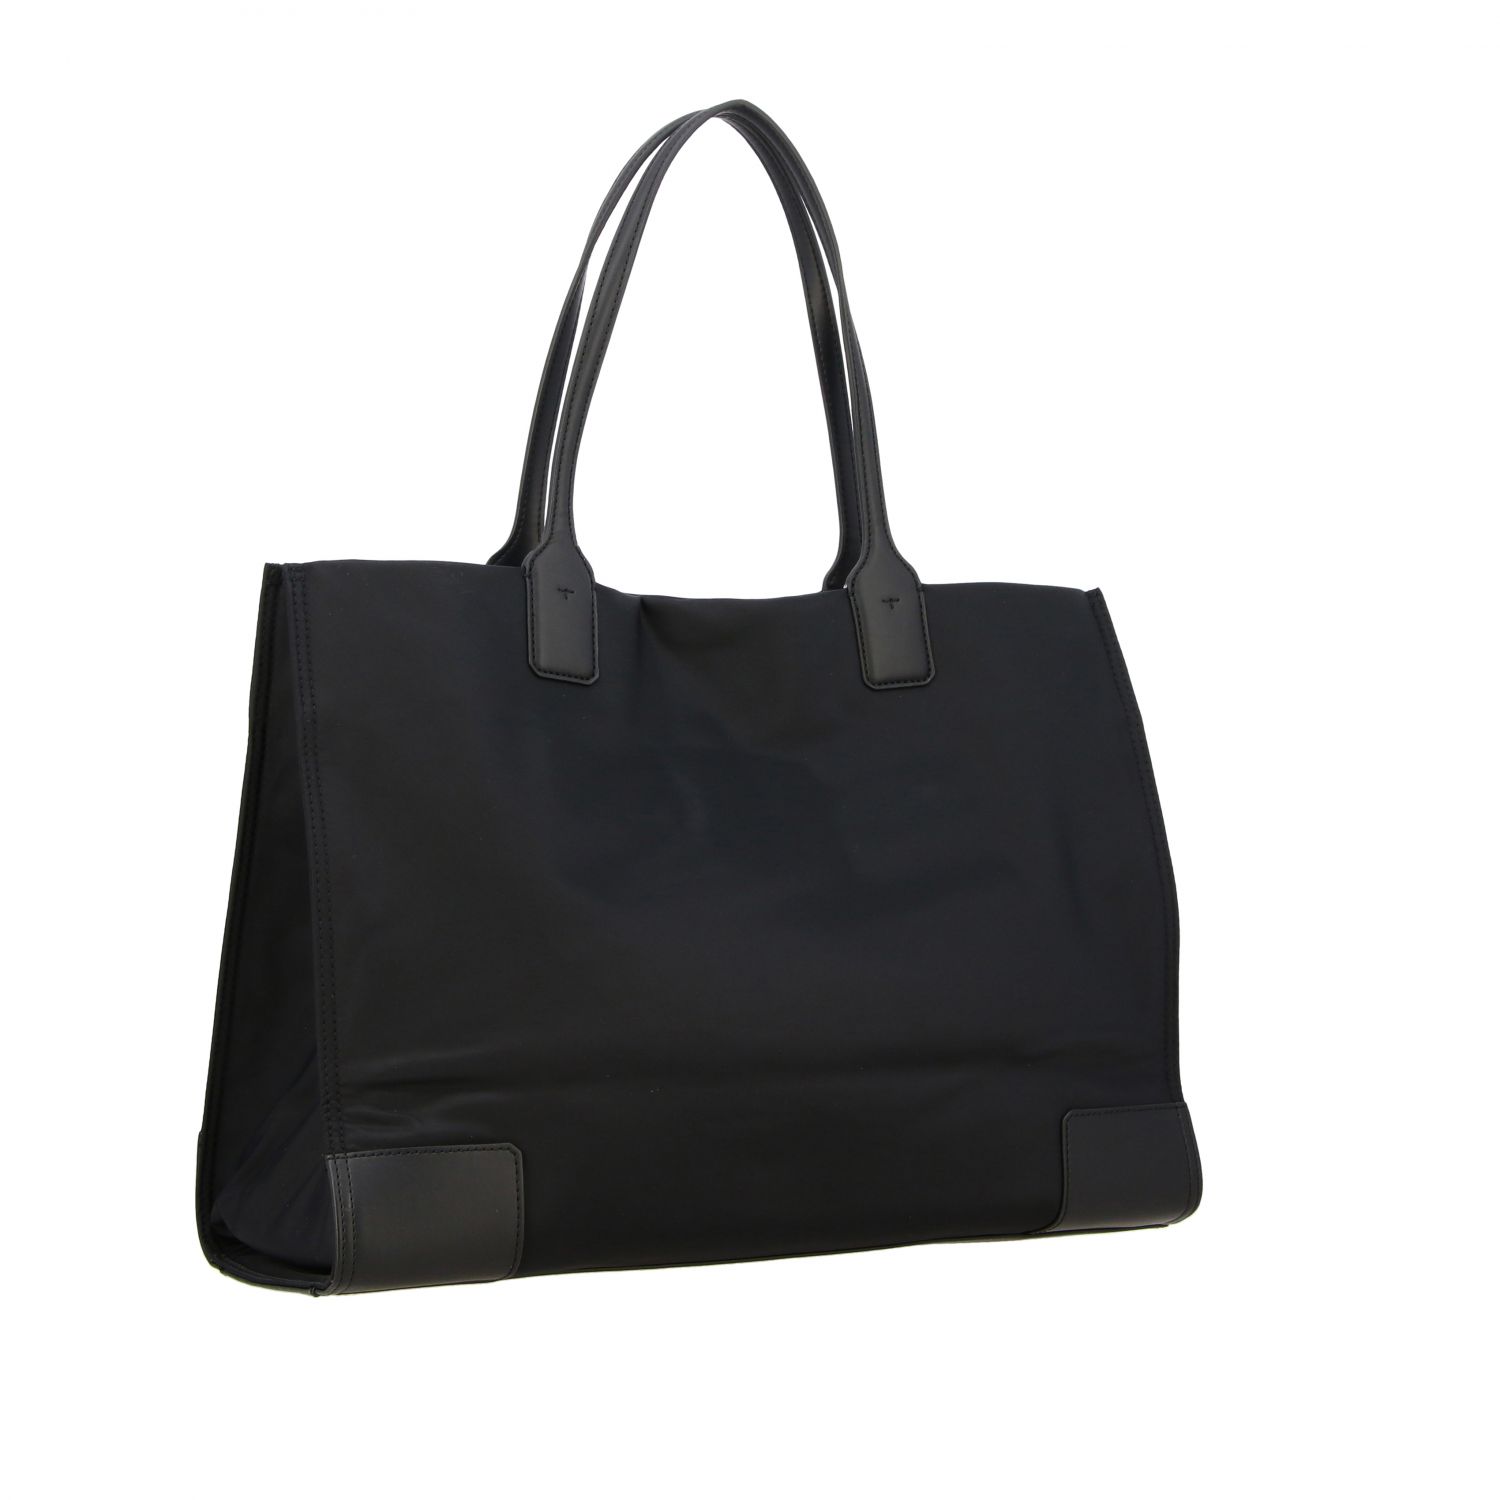 Tory Burch Outlet: Ella tote bag in nylon with emblem - Black | Tory Burch  tote bags 55228 online on 